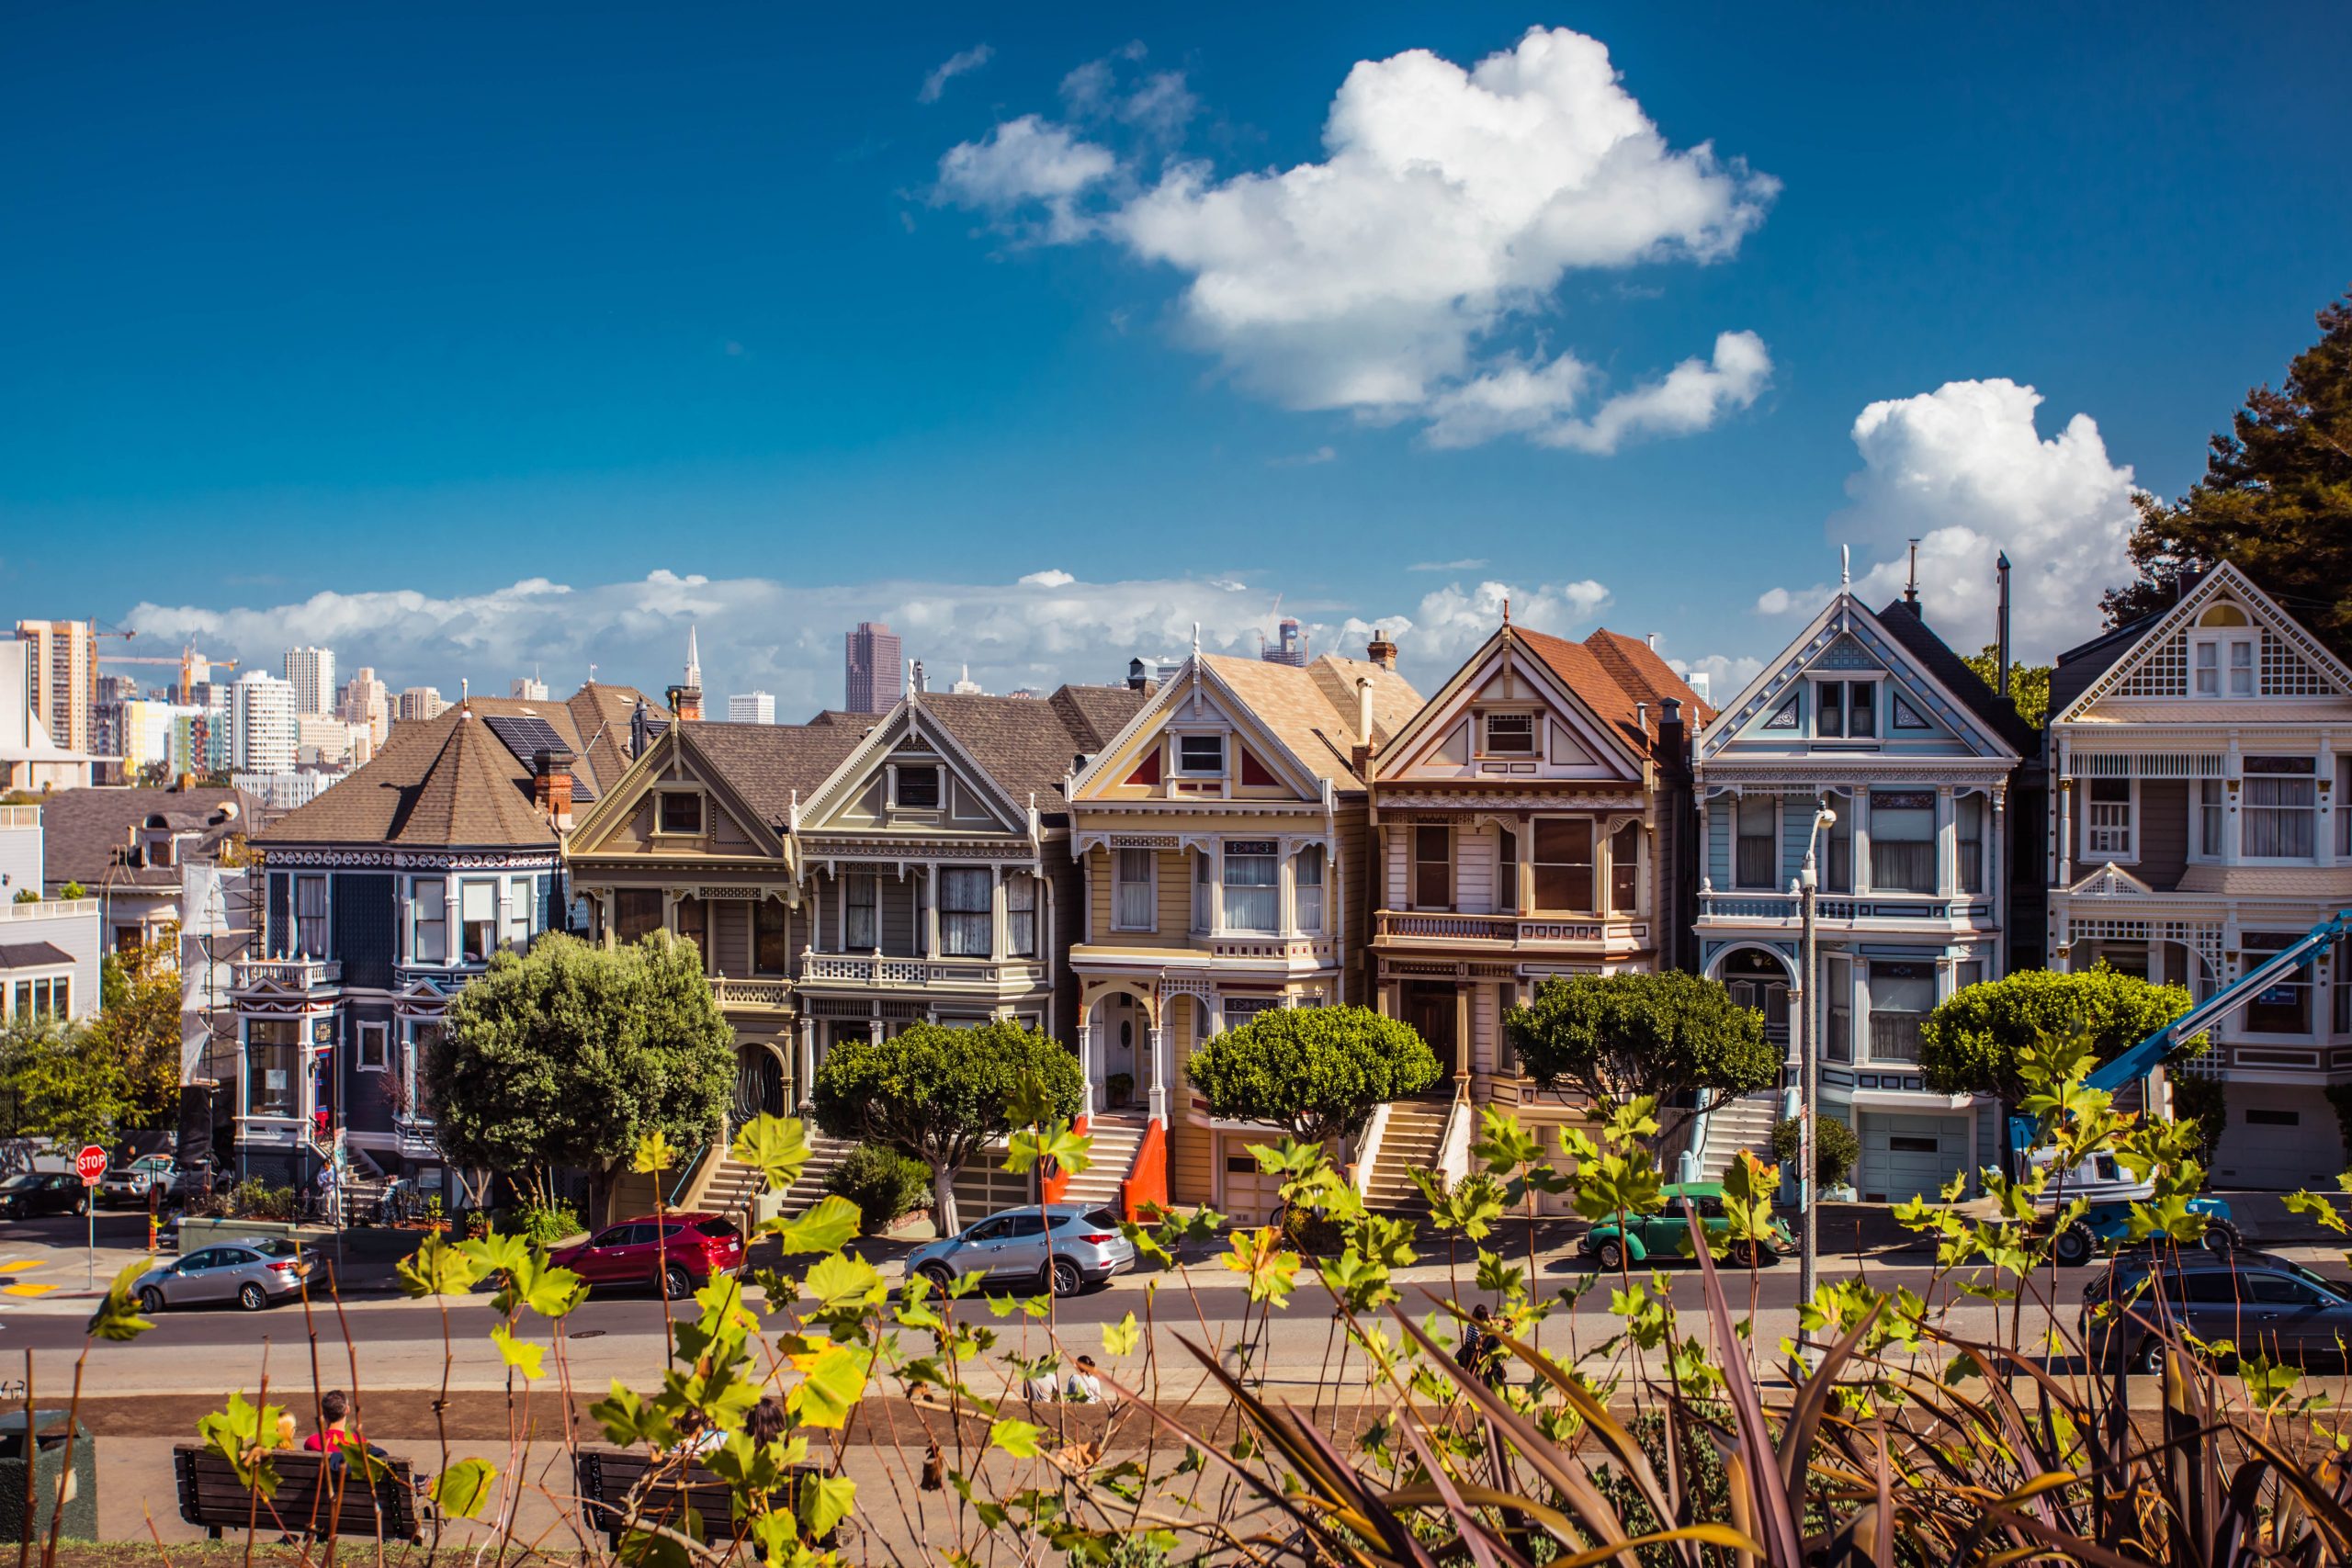 Where to stay in San Francisco - painted ladies, the beautiful and historical houses featured in many movies and one of the best areas to stay in San Francisco